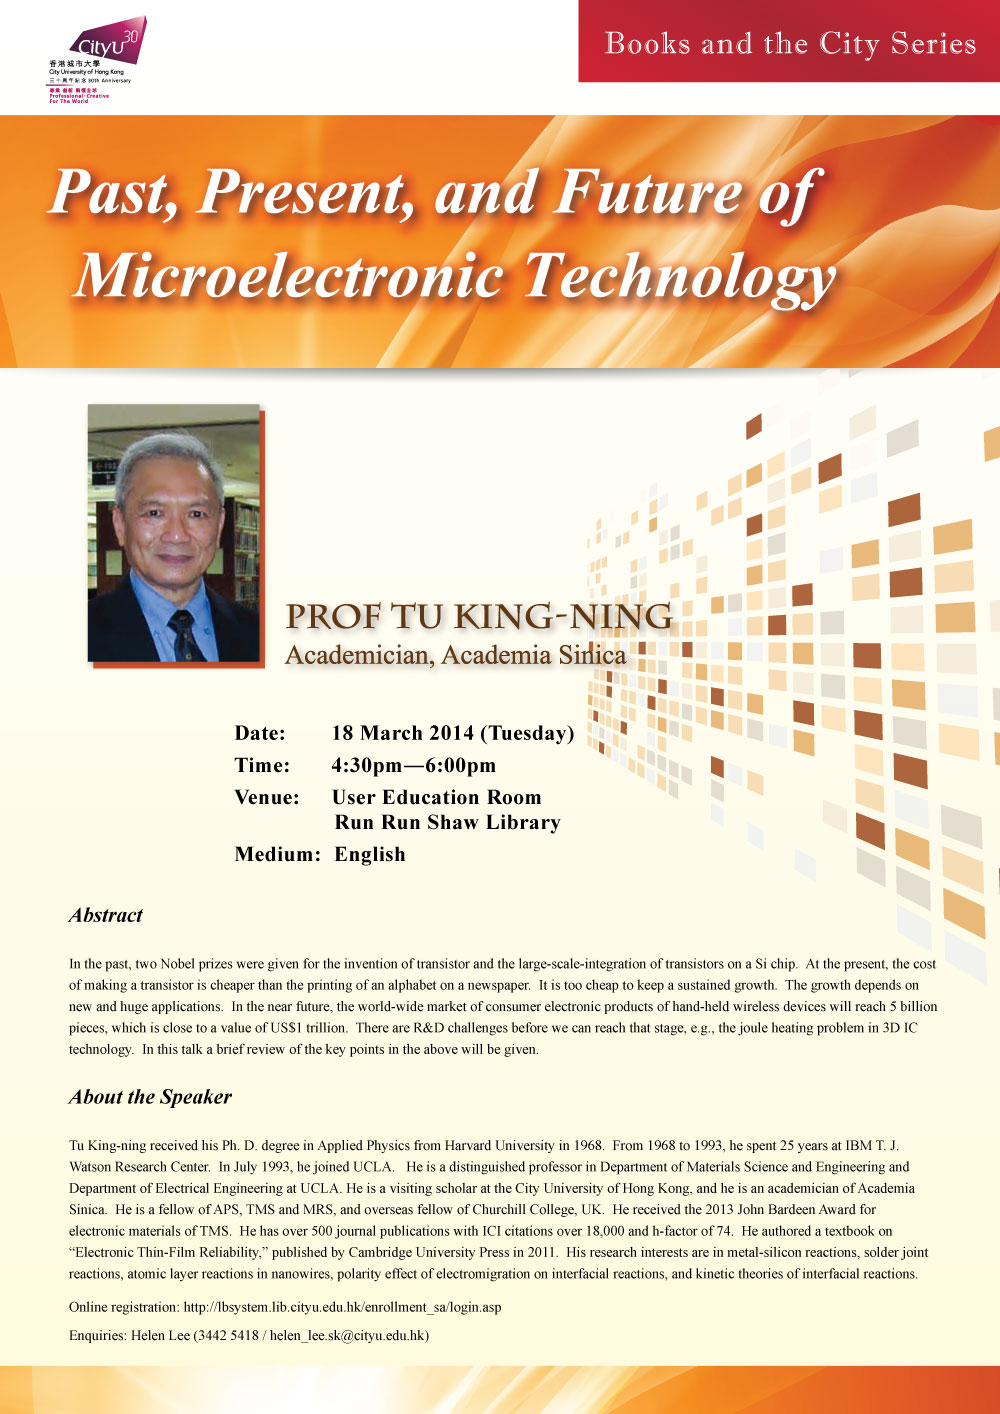 Books and the City Series: Past, Present, and Future of Microelectronic Technology